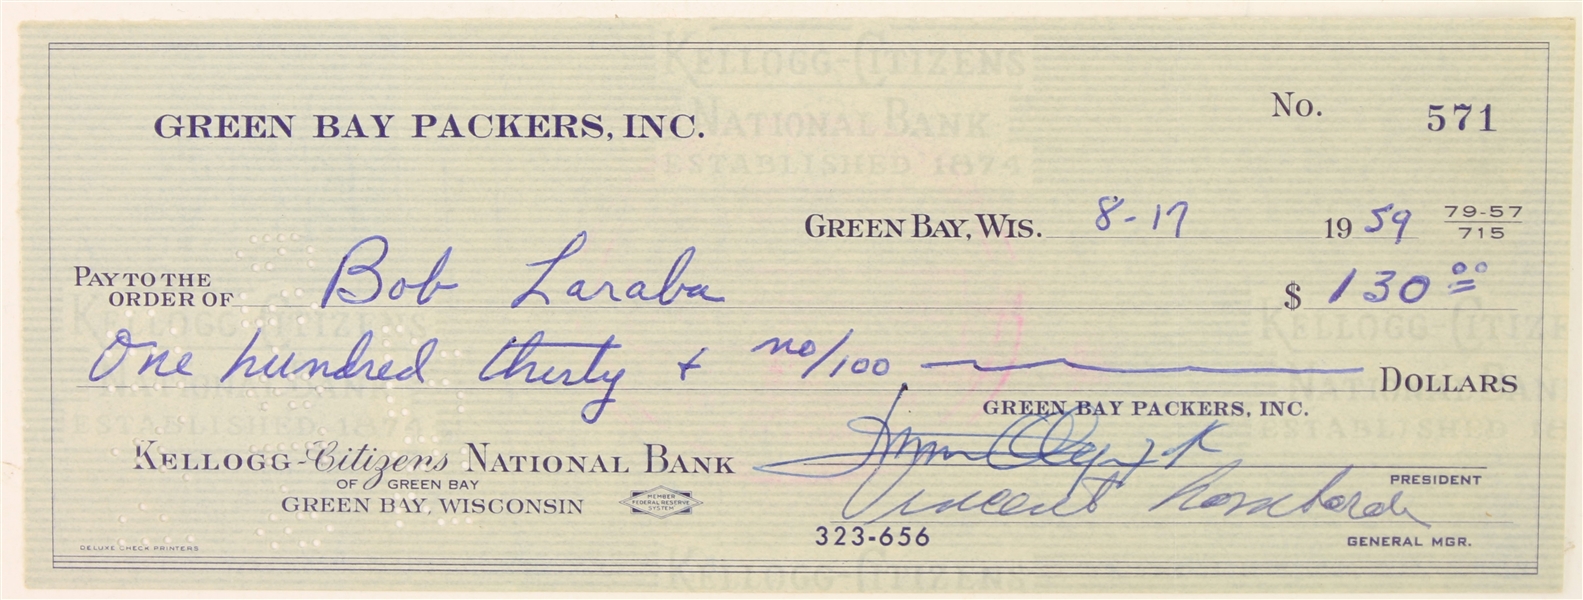 1959 Vince Lombardi Green Bay Packers Signed Check (JSA)